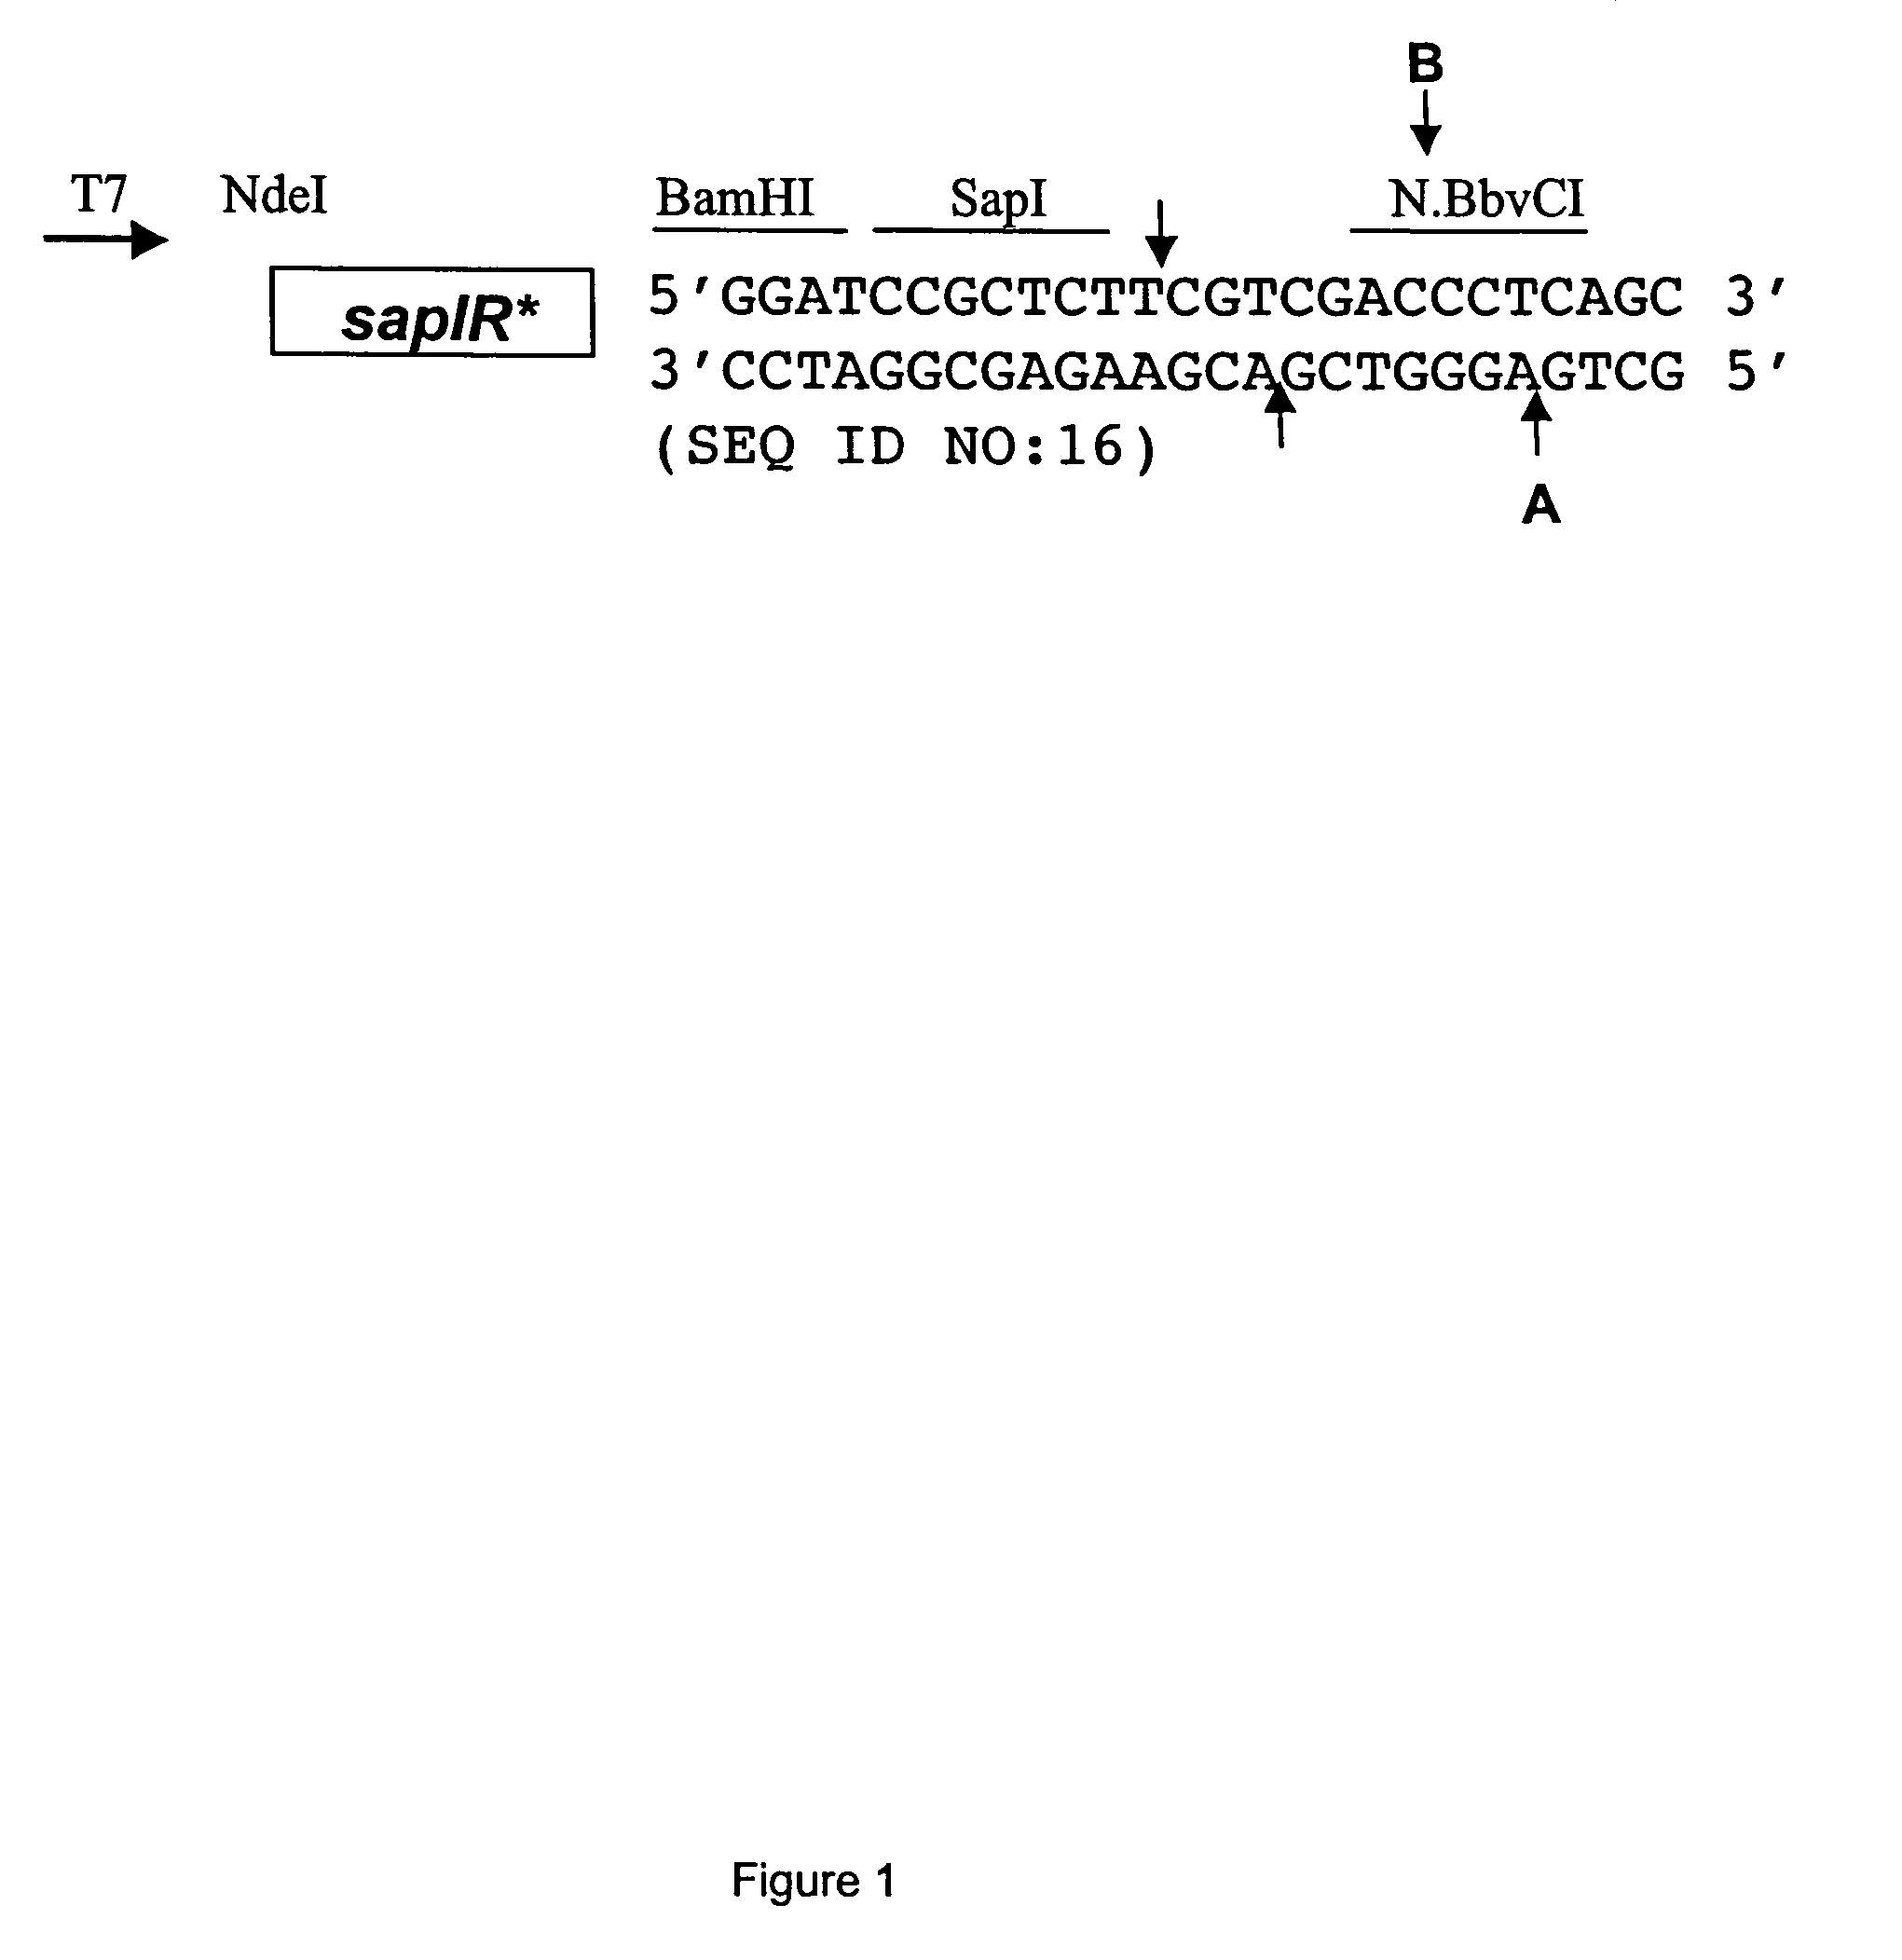 Method for engineering strand-specific nicking endonucleases from restriction endonucleases